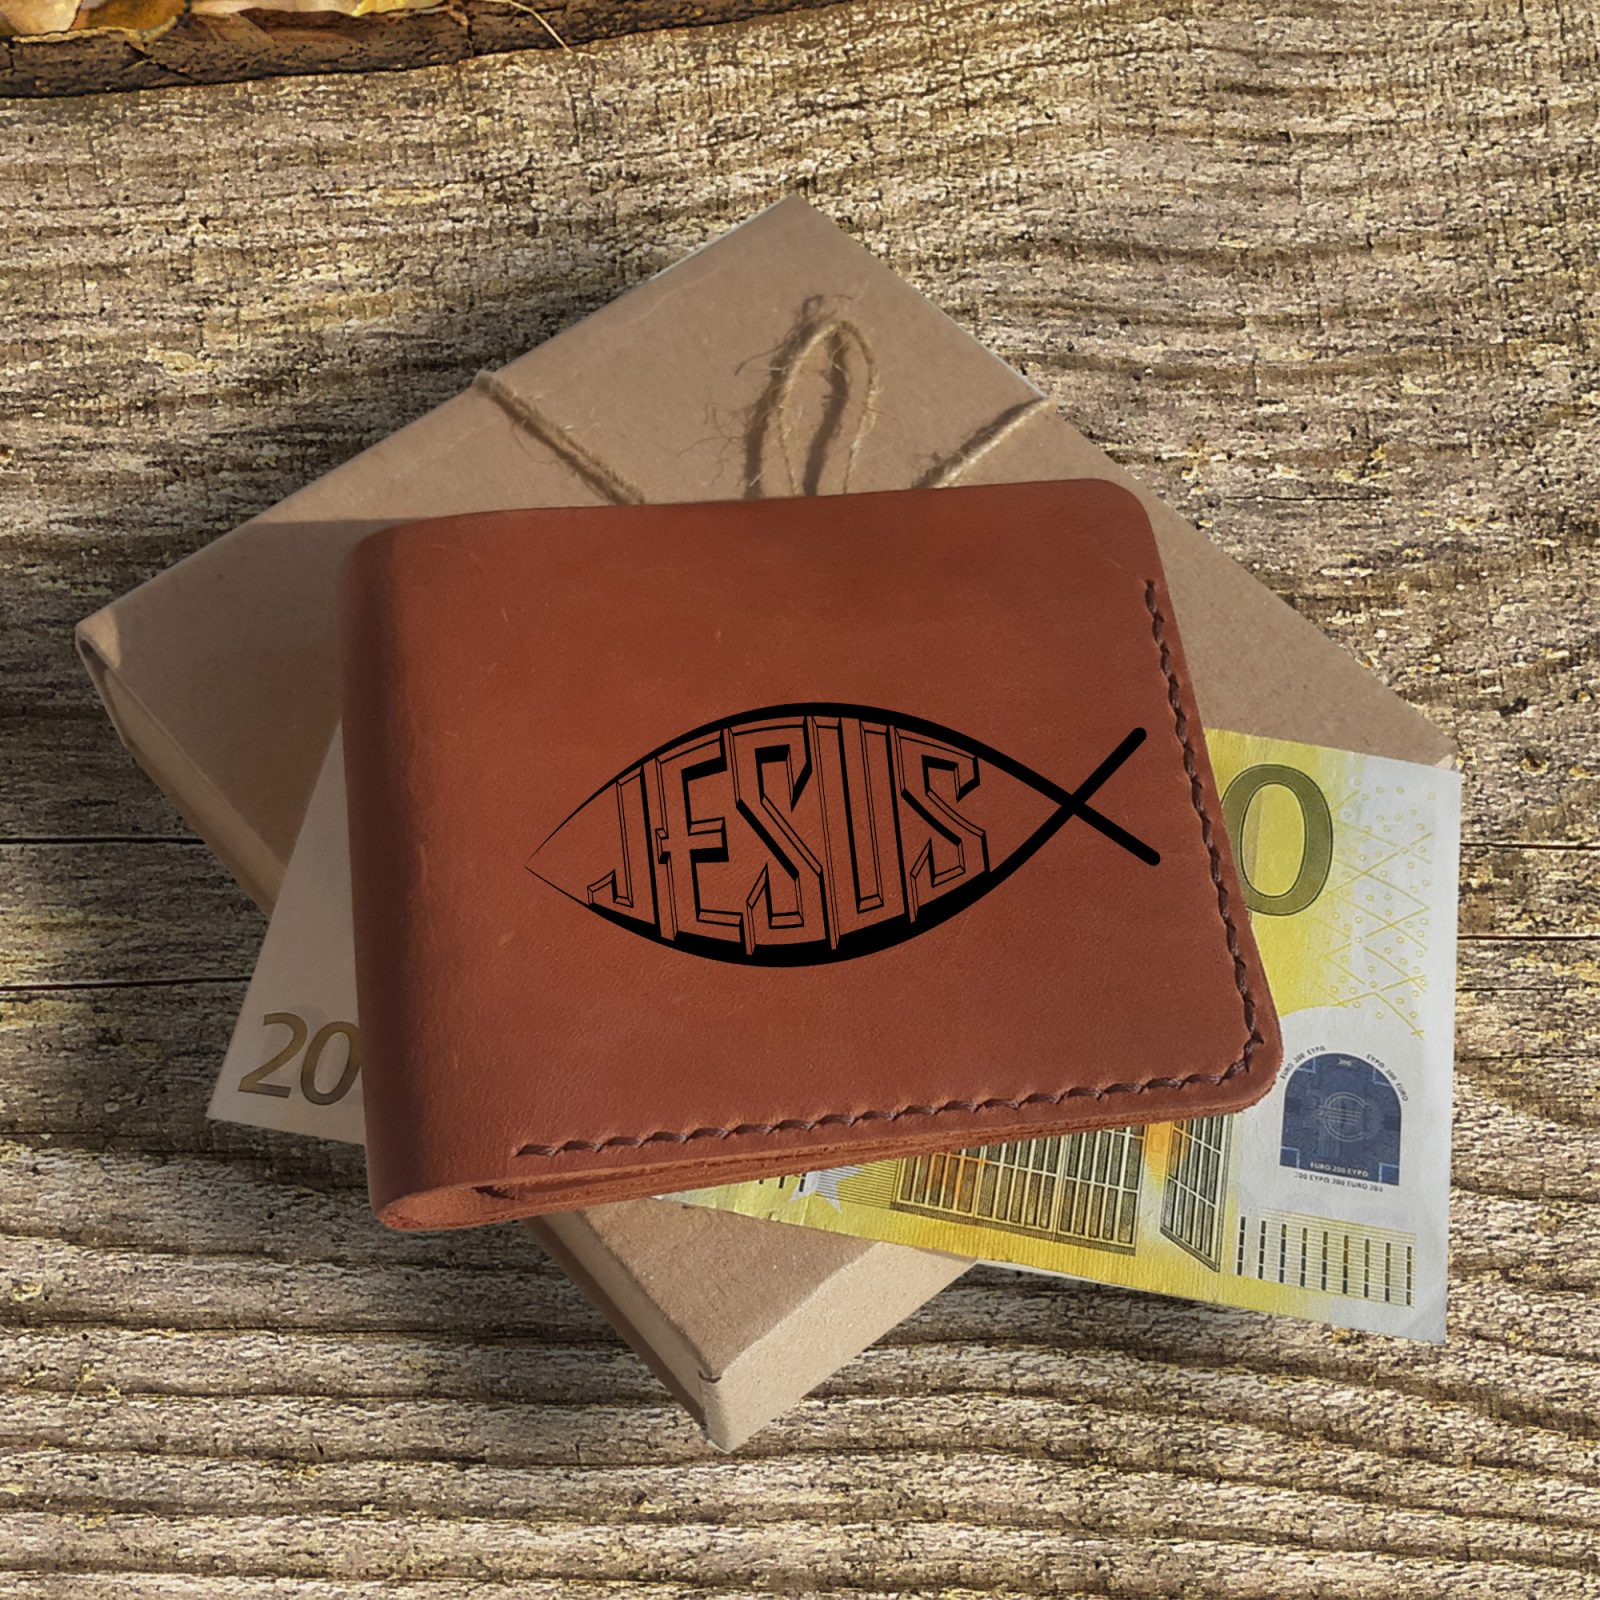 Christian Gifts ➤ Personalized Wallet. Handmade Leather Wallet